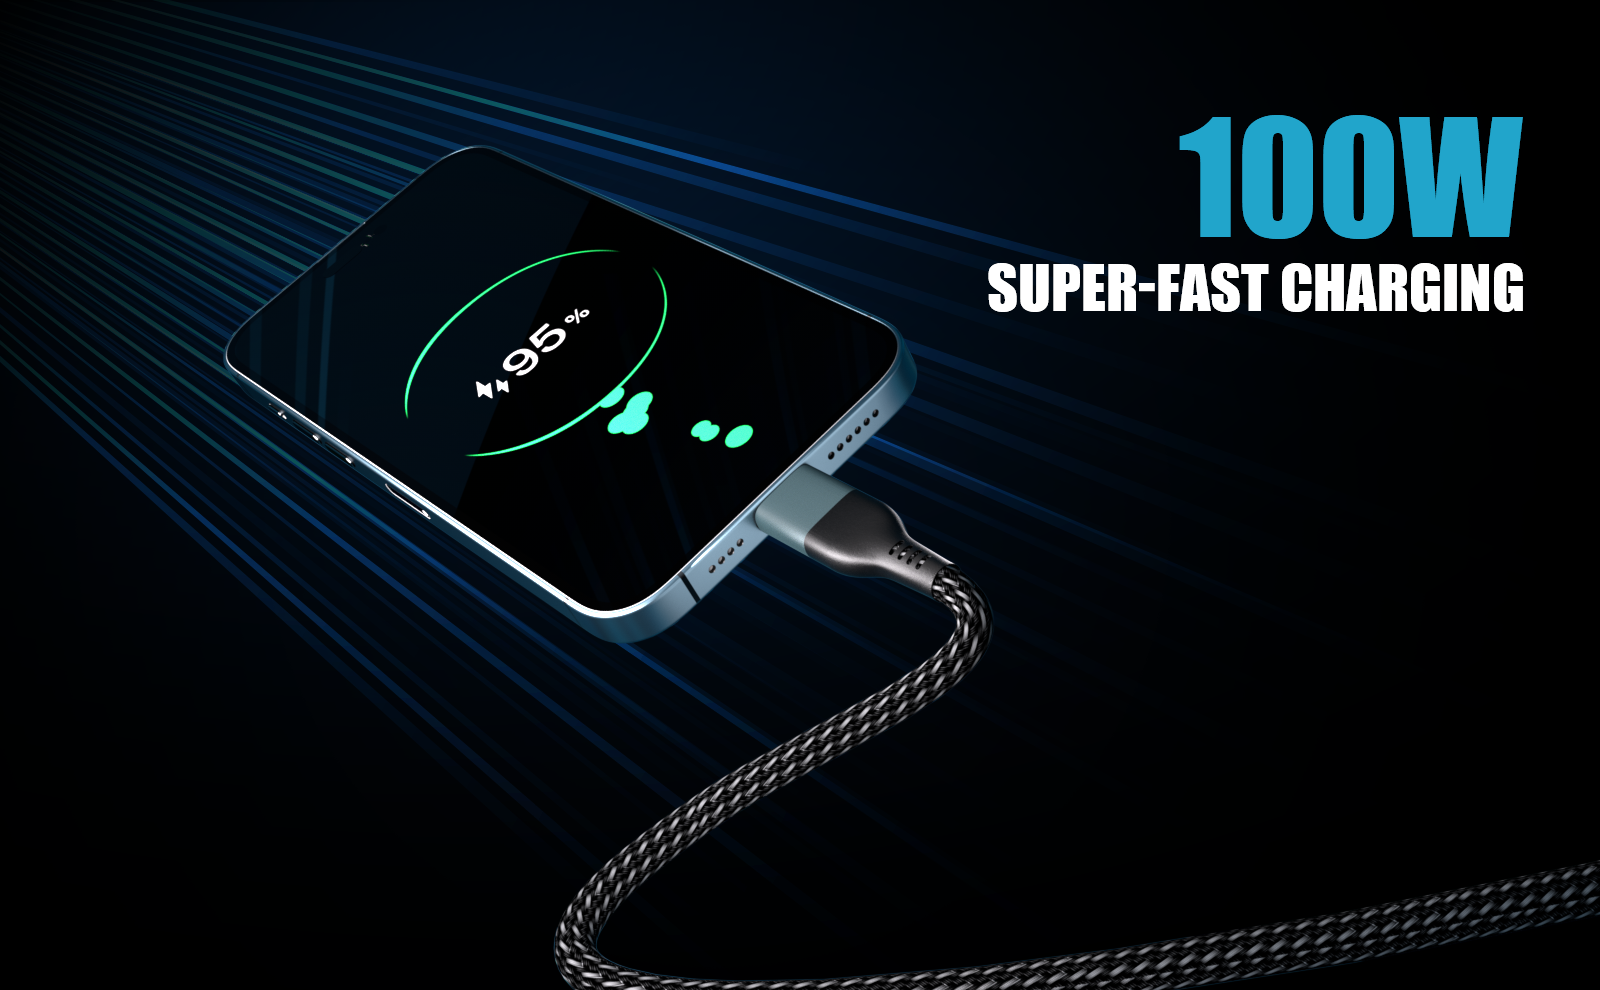 100W fast charging can make your phone full in 2 hours